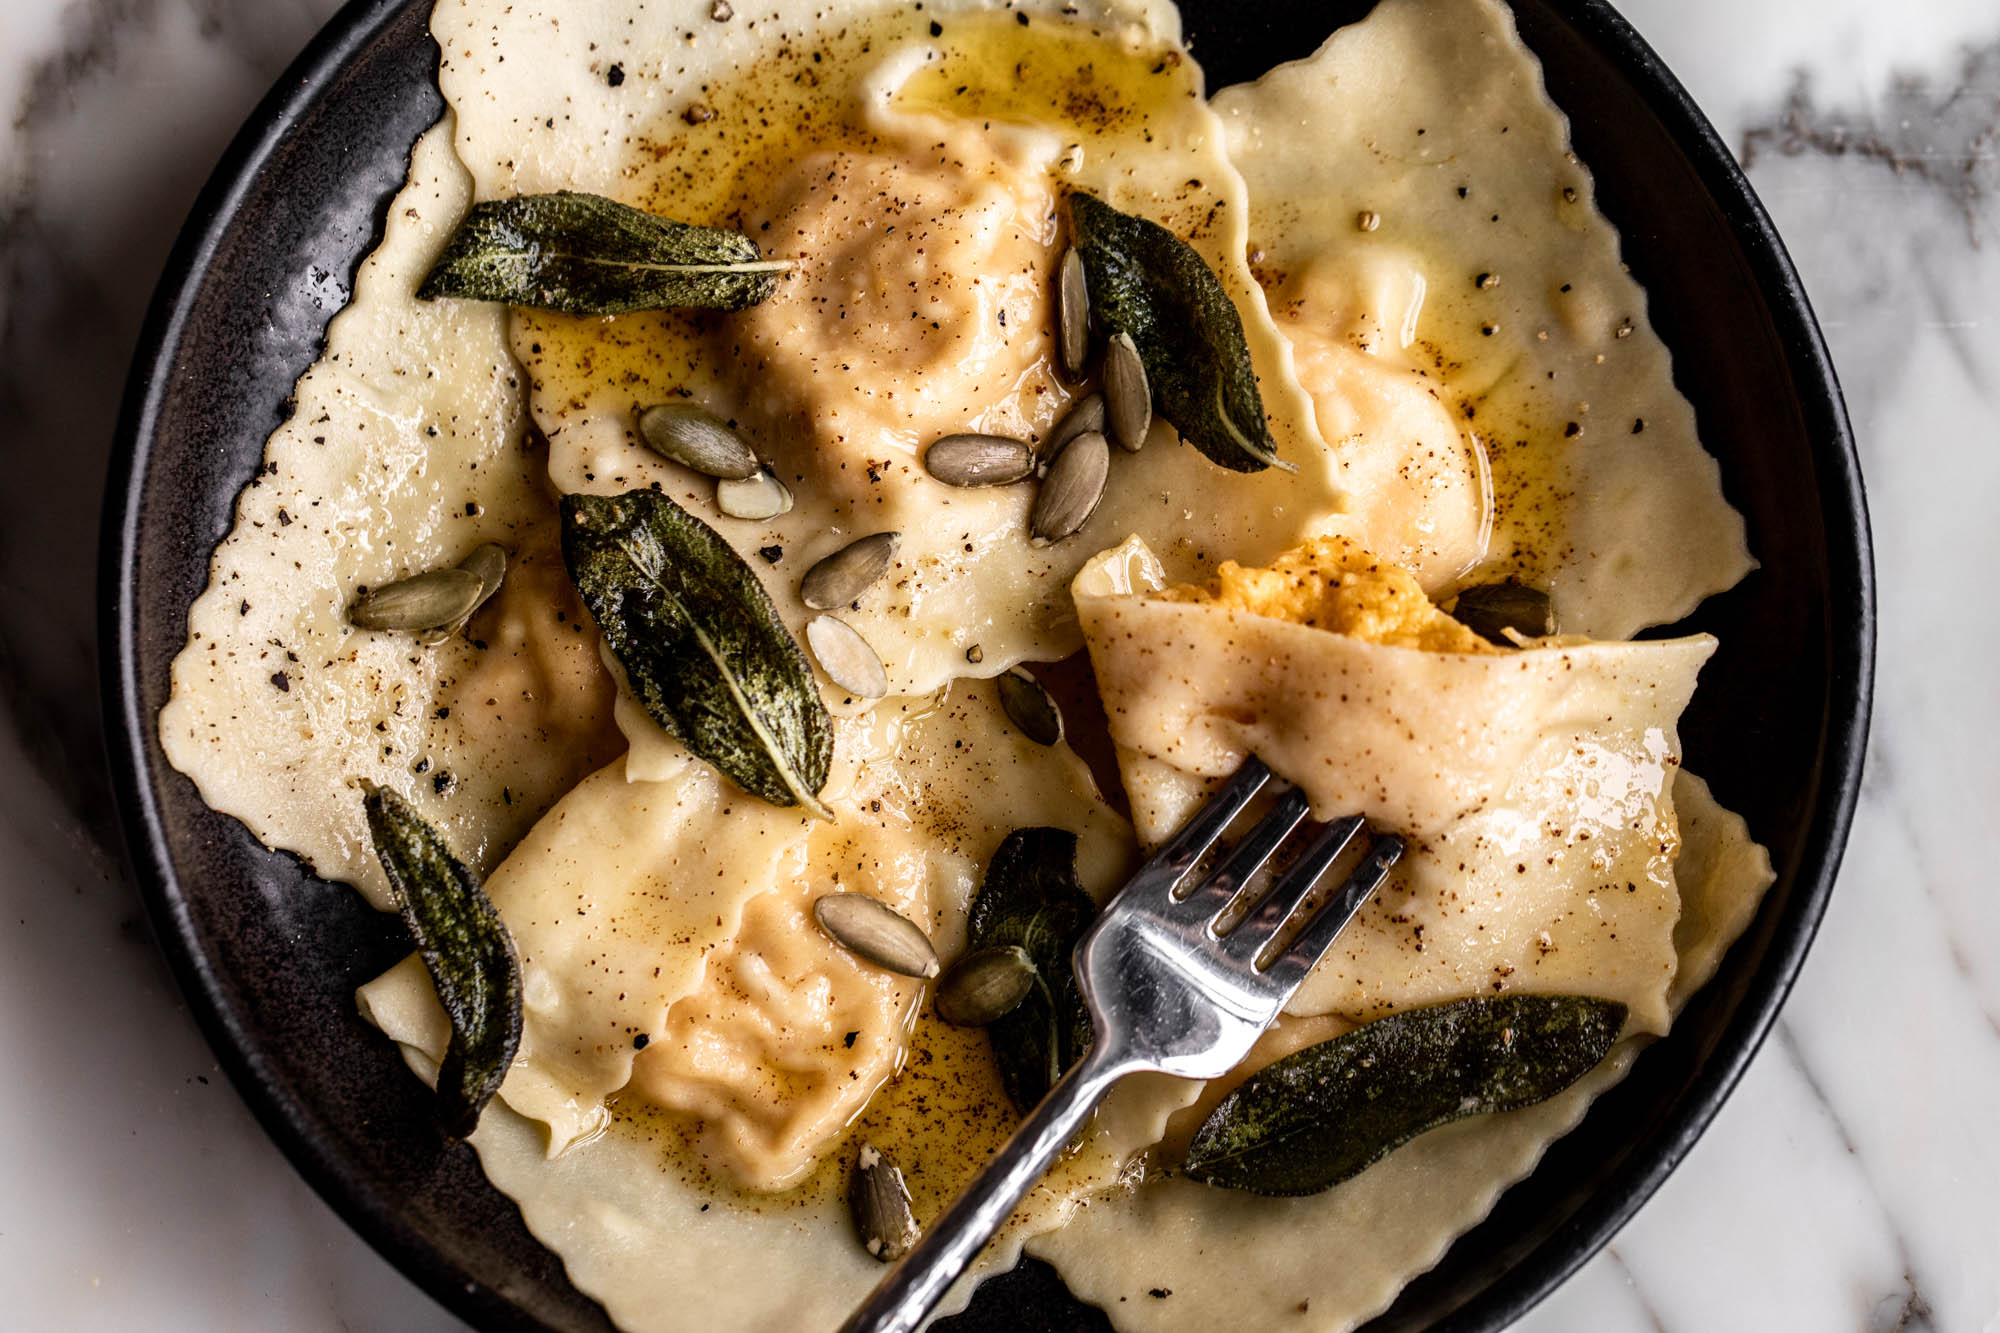 https://cookingwithcocktailrings.com/wp-content/uploads/2022/10/Butternut-Squash-Ravioli-with-Brown-Butter-and-Sage-47.jpg